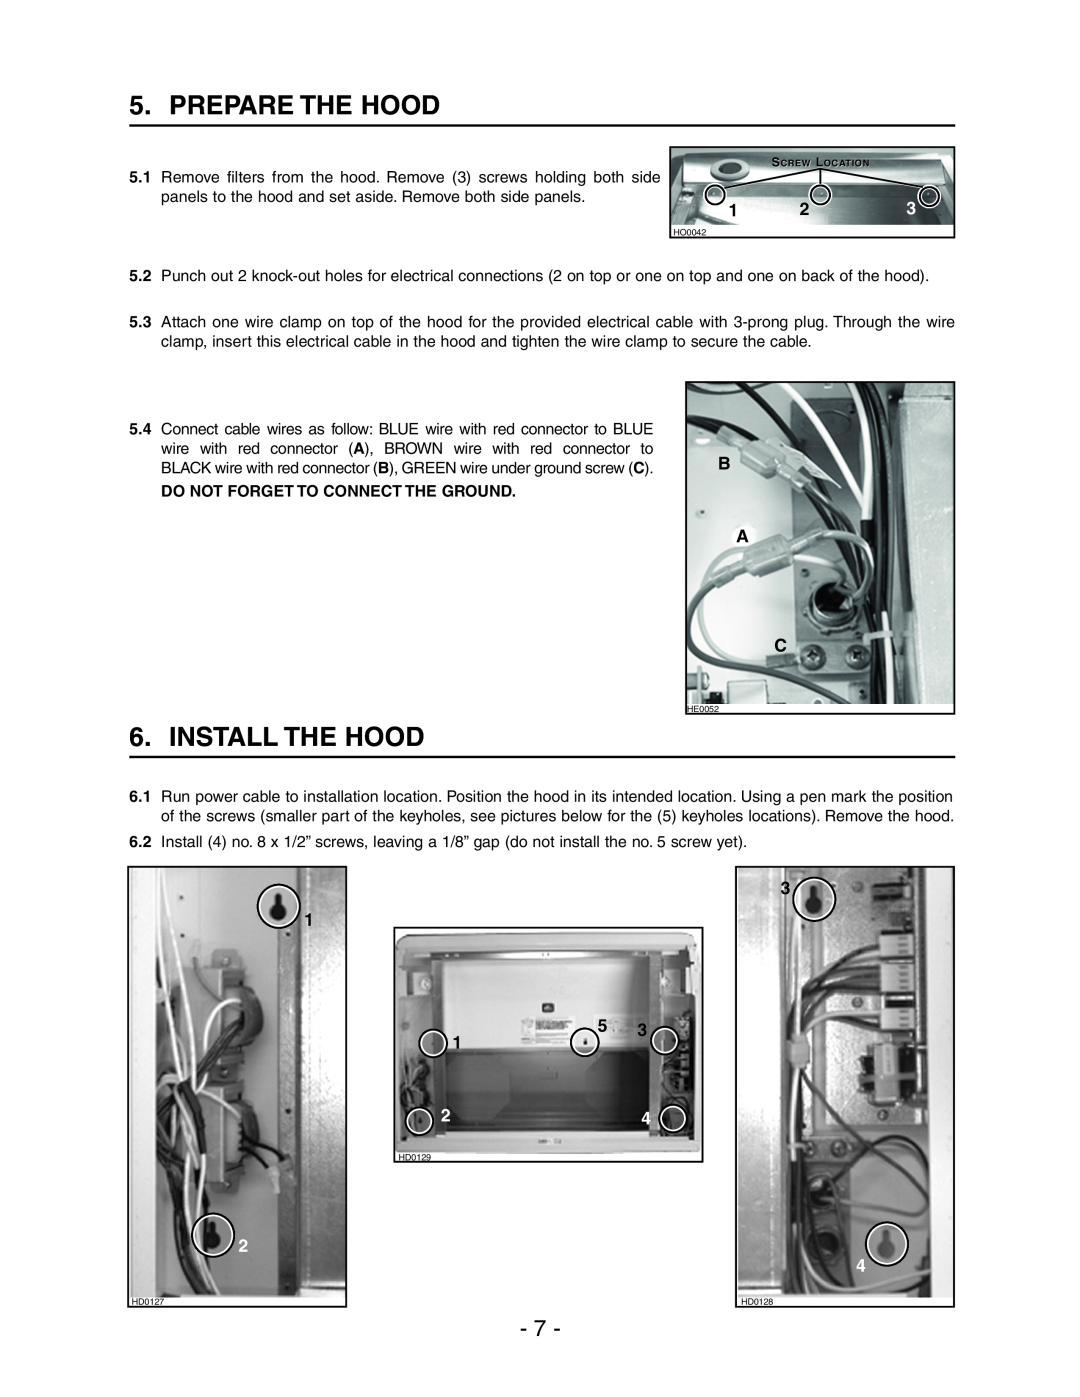 Broan E662 installation instructions Prepare The Hood, Install The Hood, B A C, Do Not Forget To Connect The Ground 